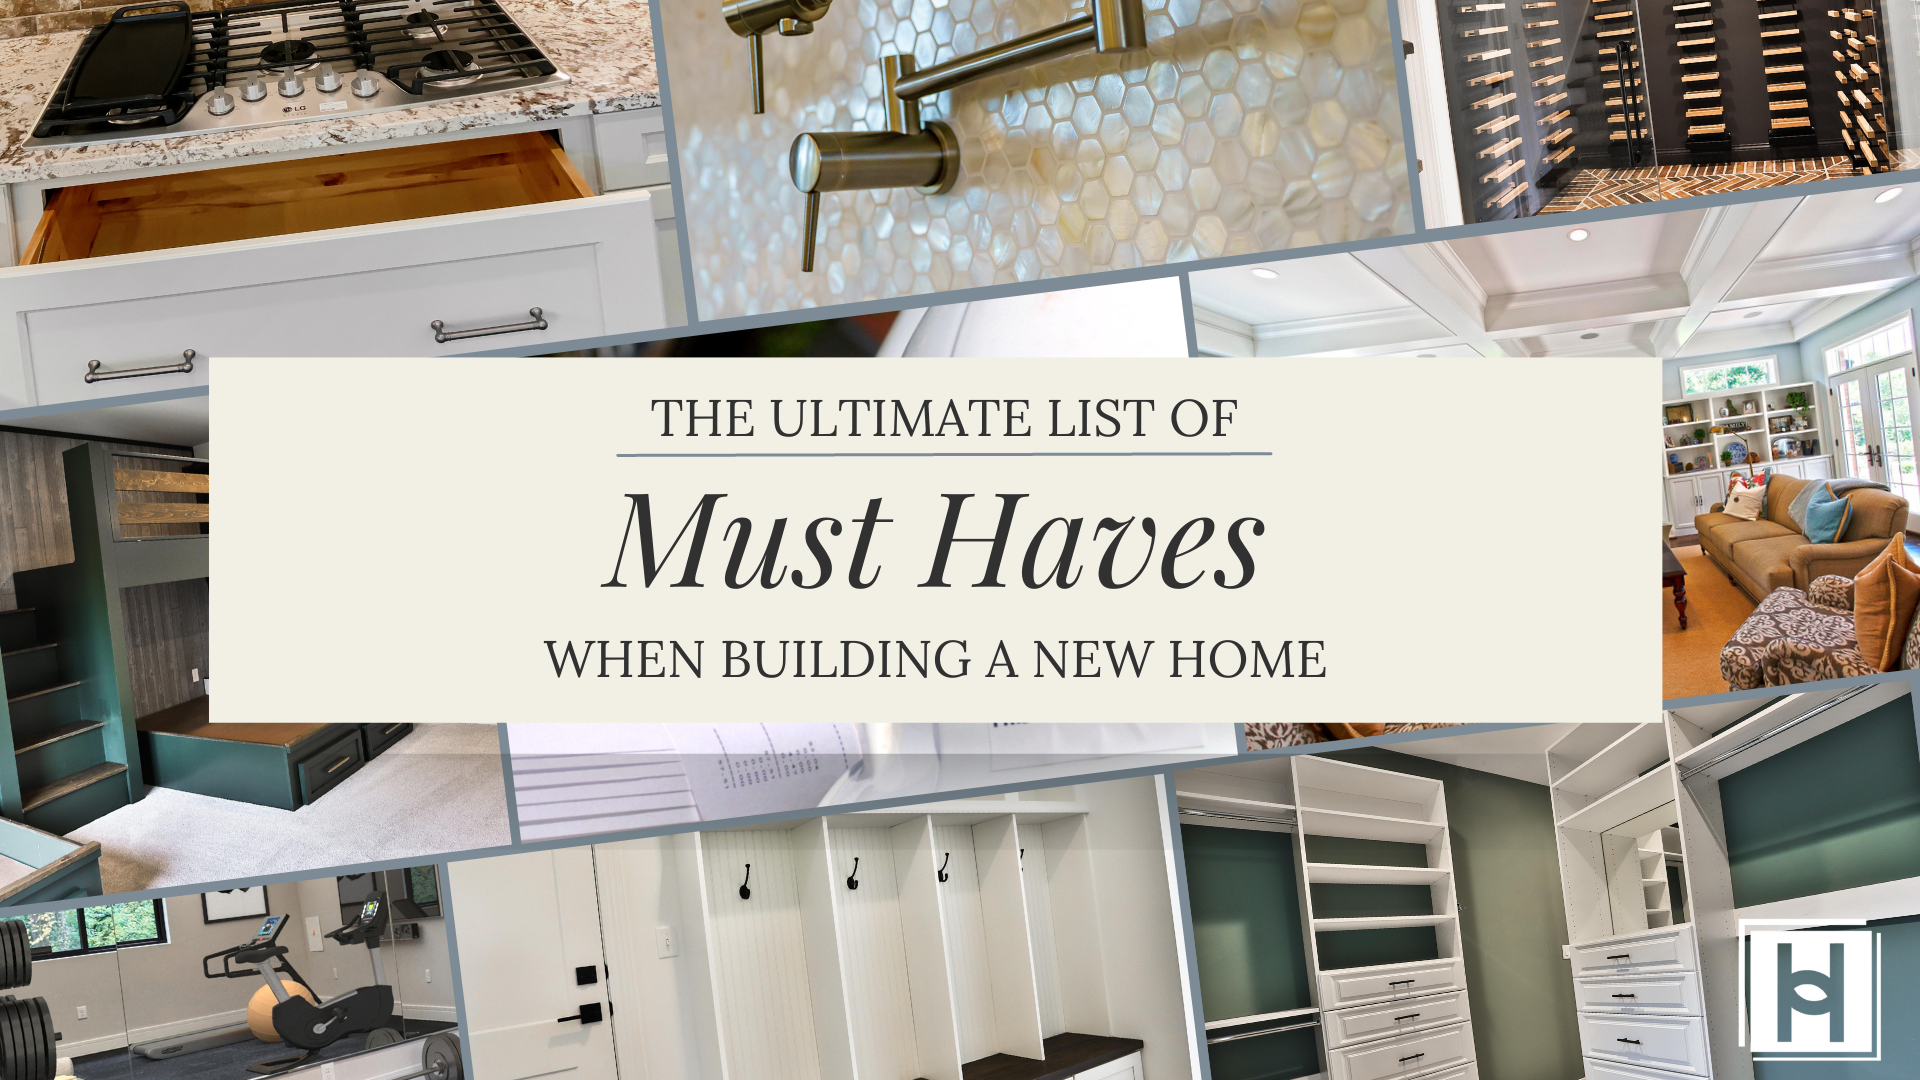 Must Have Features For Your Custom Home